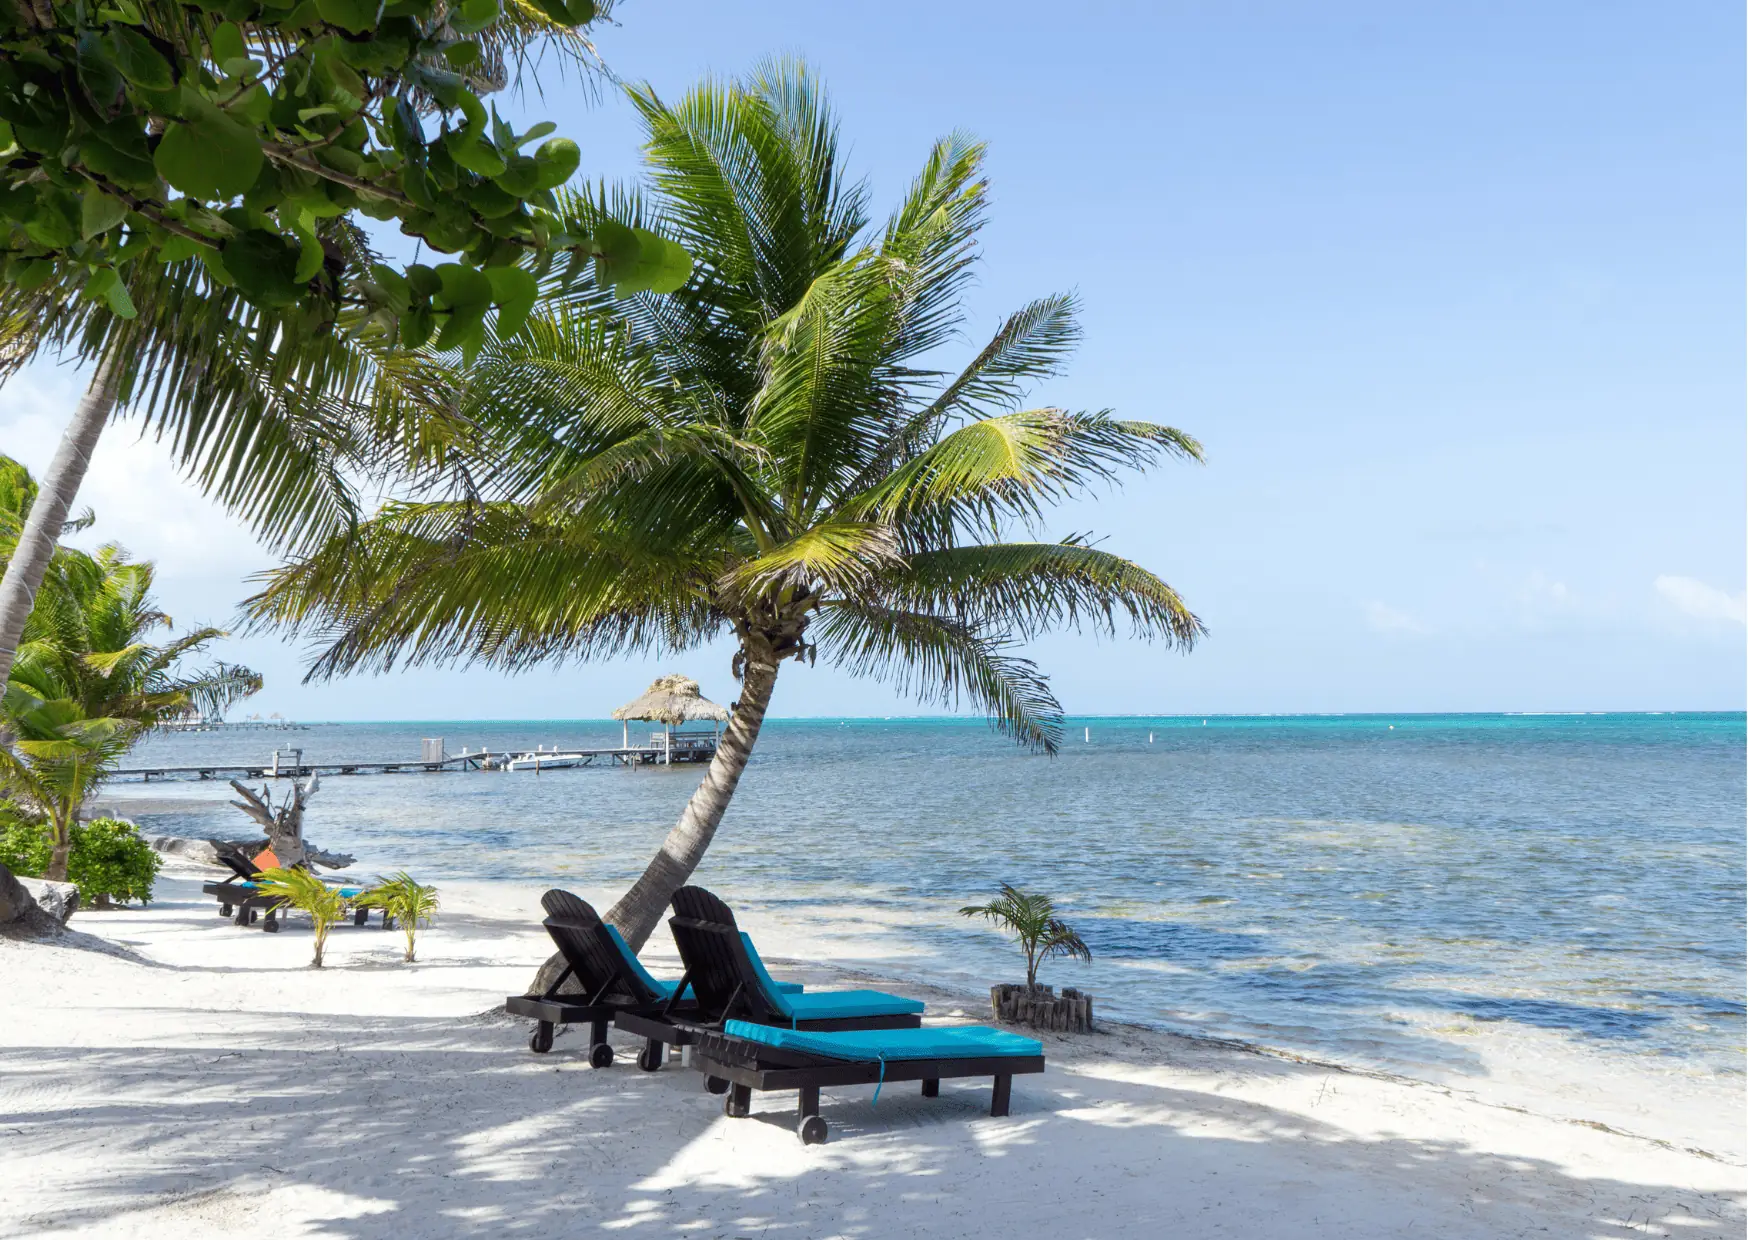 Aruba vs Belize - Which is the Better Vacation?